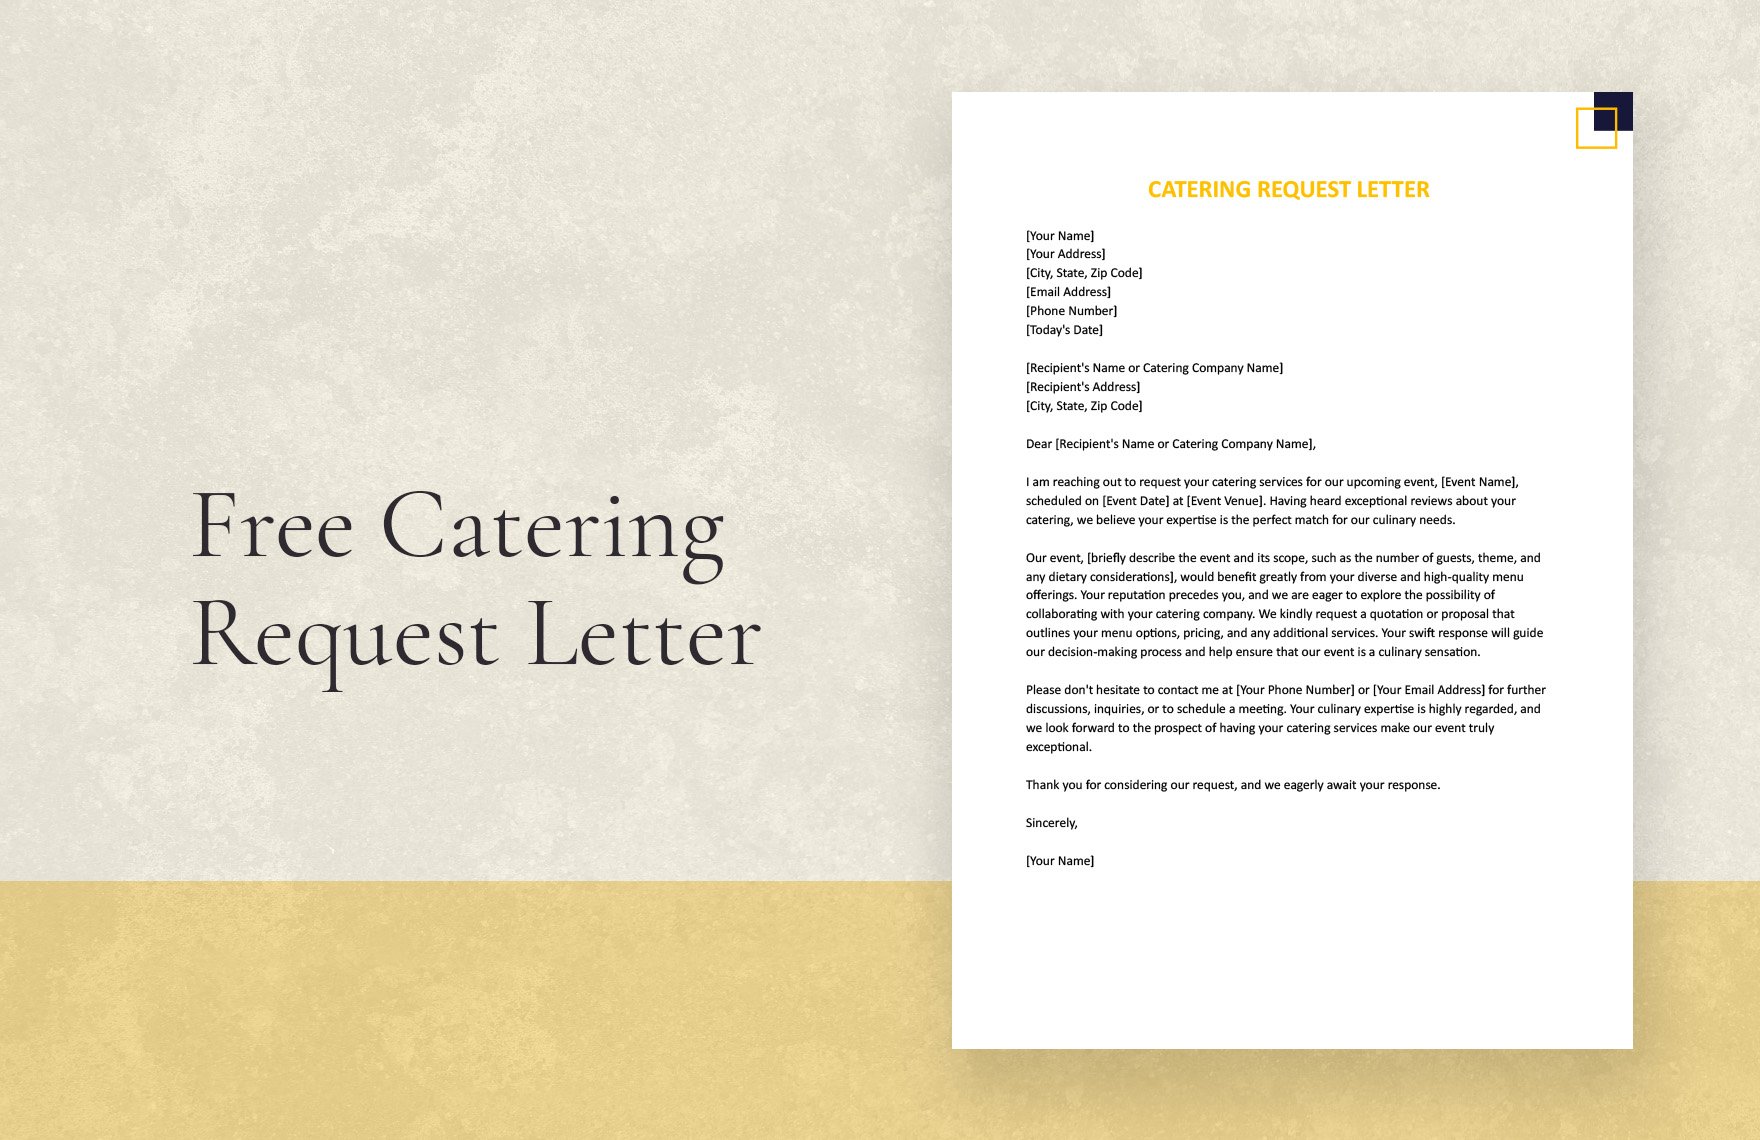 Free Catering Request Letter